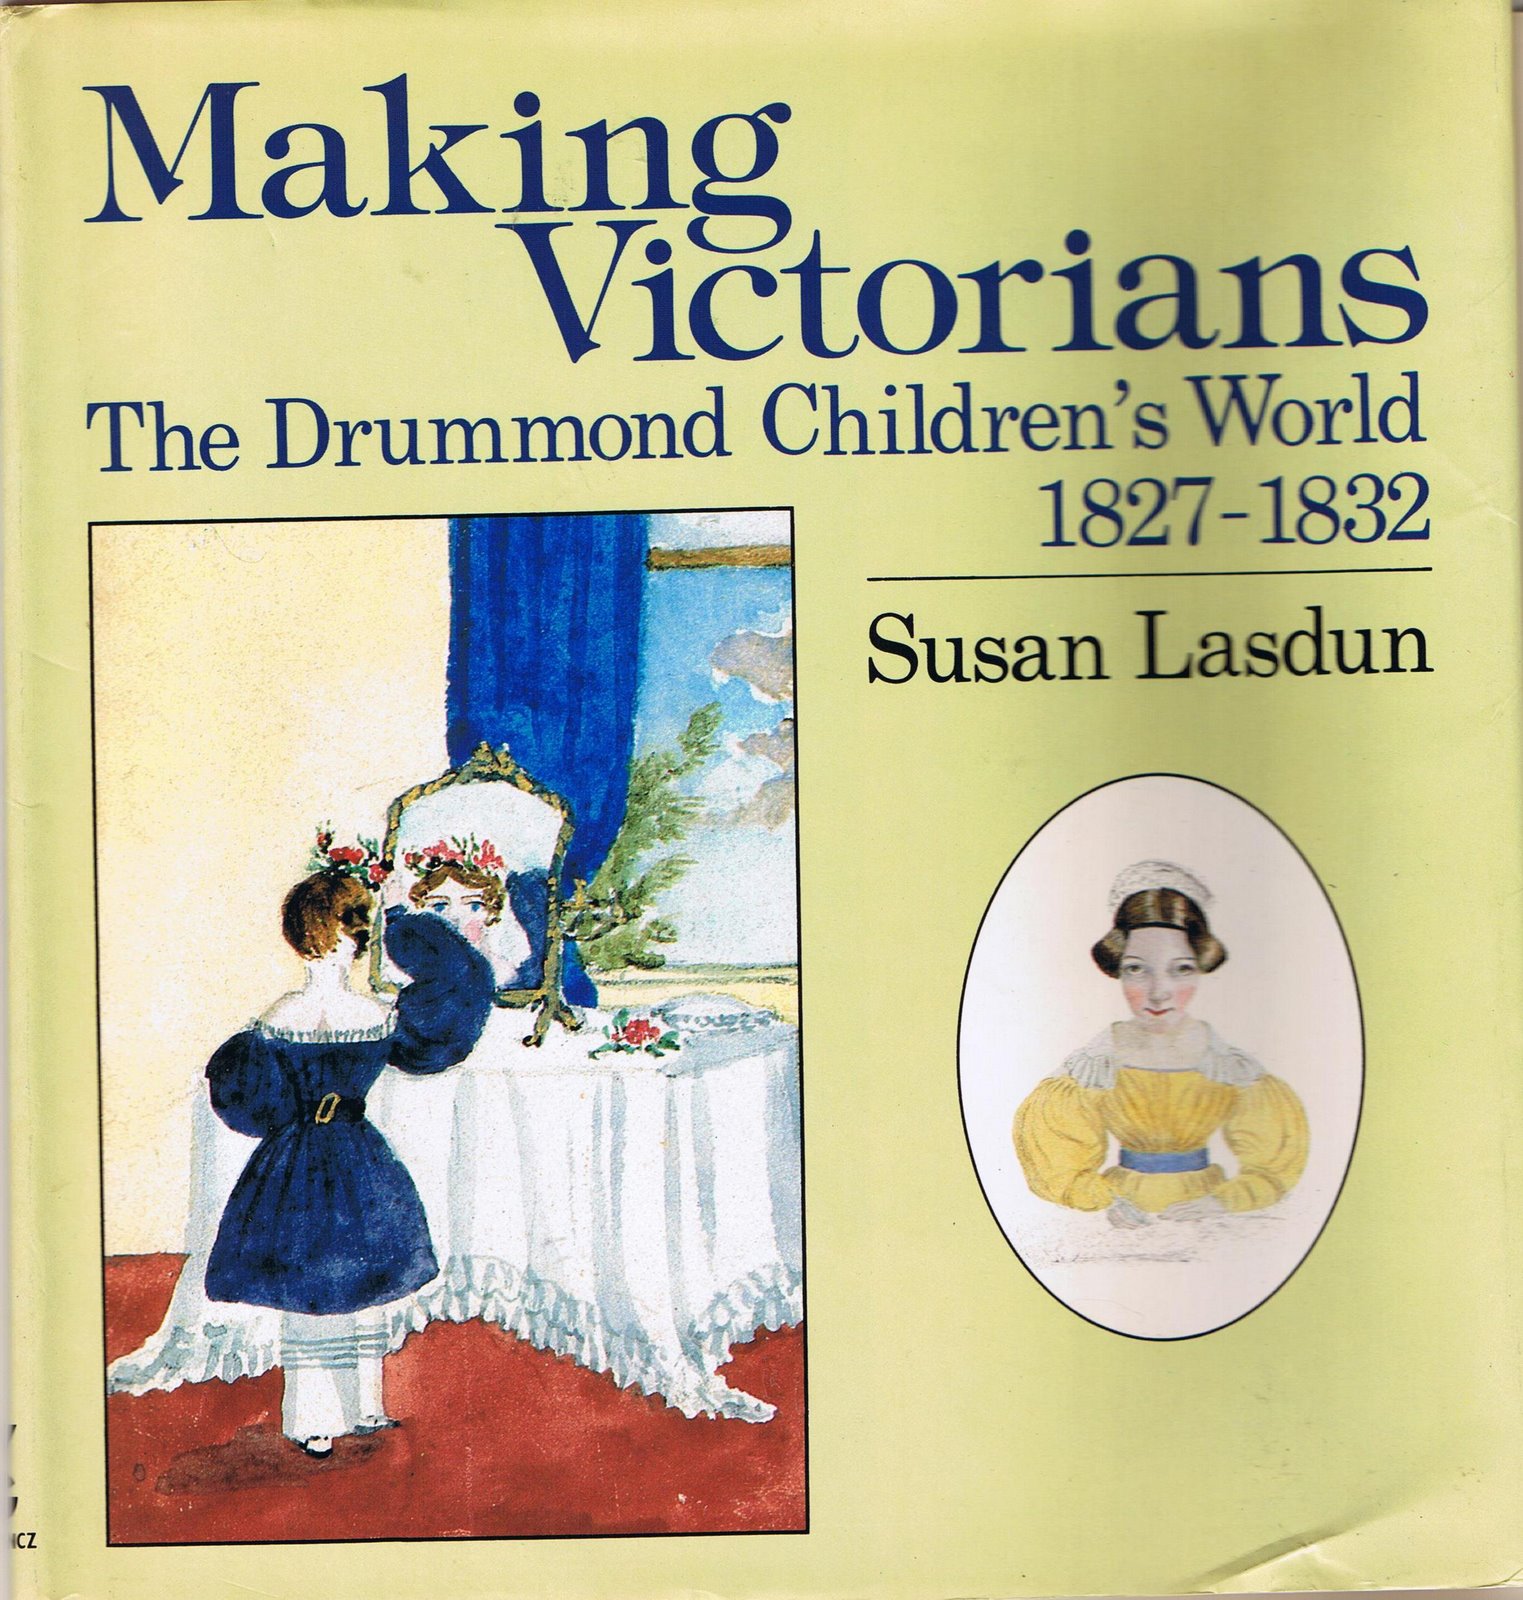 [Cover+of+Making+Victorians.JPG]